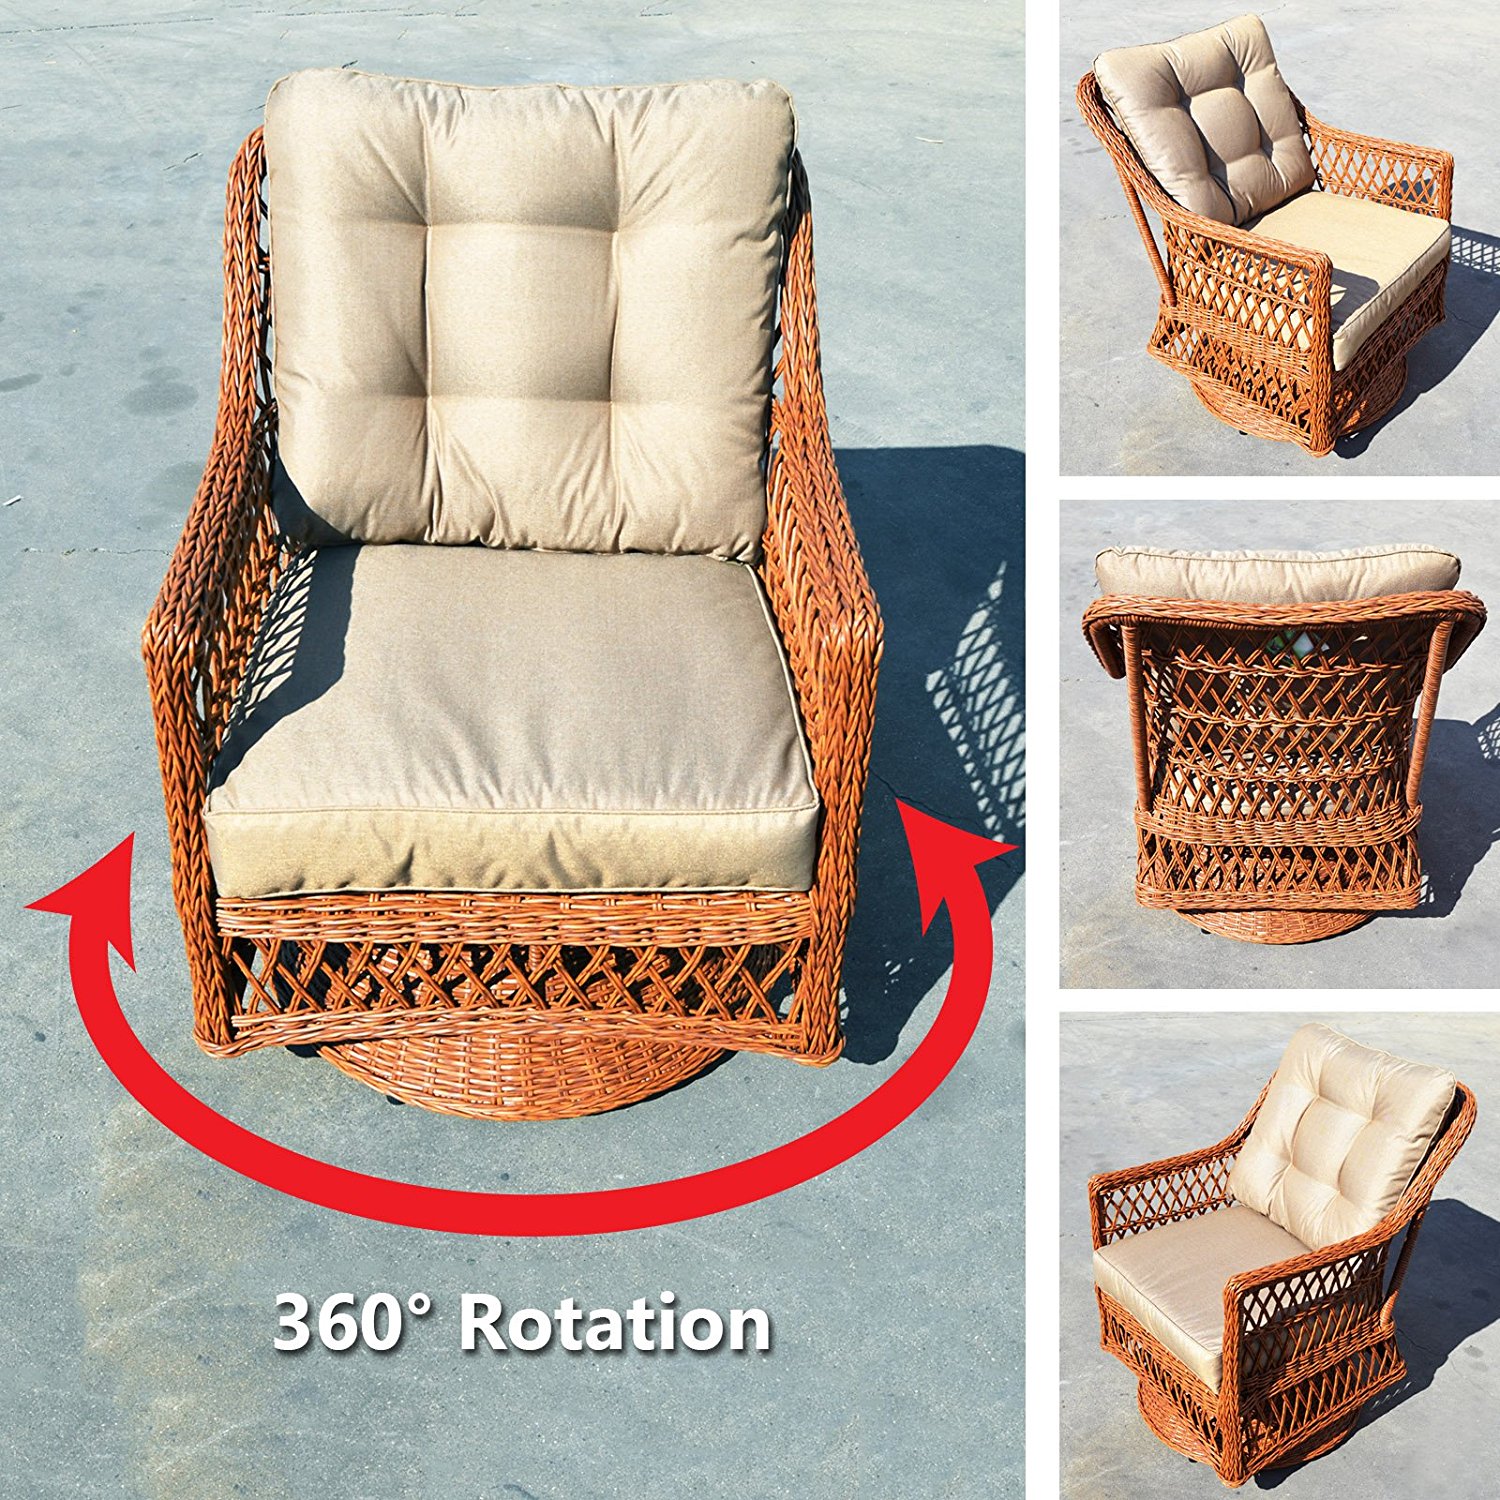 Sunny 5pc Wicker Rattan Table Chair Patio Sofa Furniture Set with Cushions Outdoor Garden W/ 3 Swivel Revolving Chairs and 2 Tables - image 4 of 8